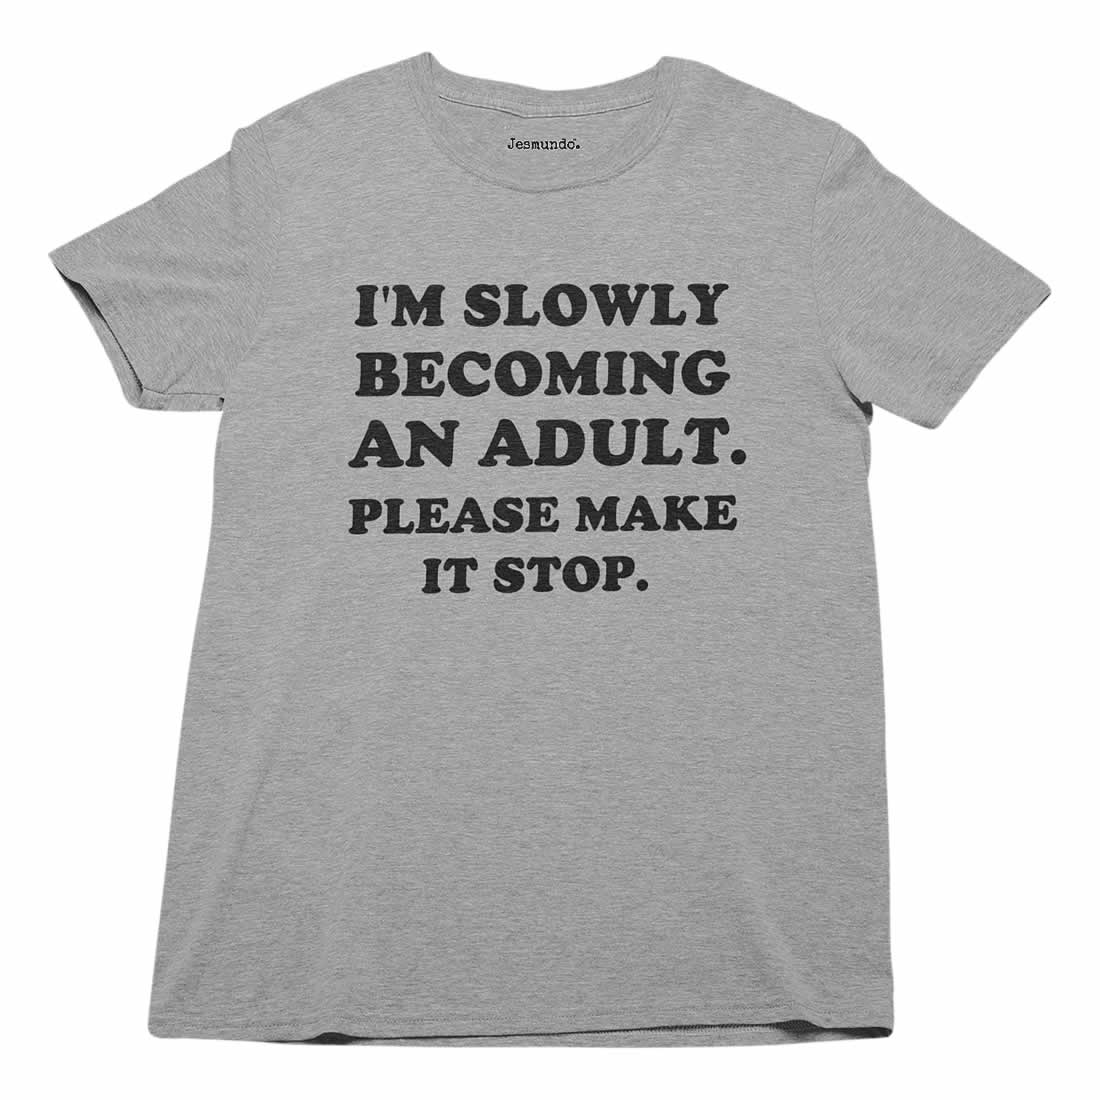 I'm slowly becoming an adult please make it stop t-shirt